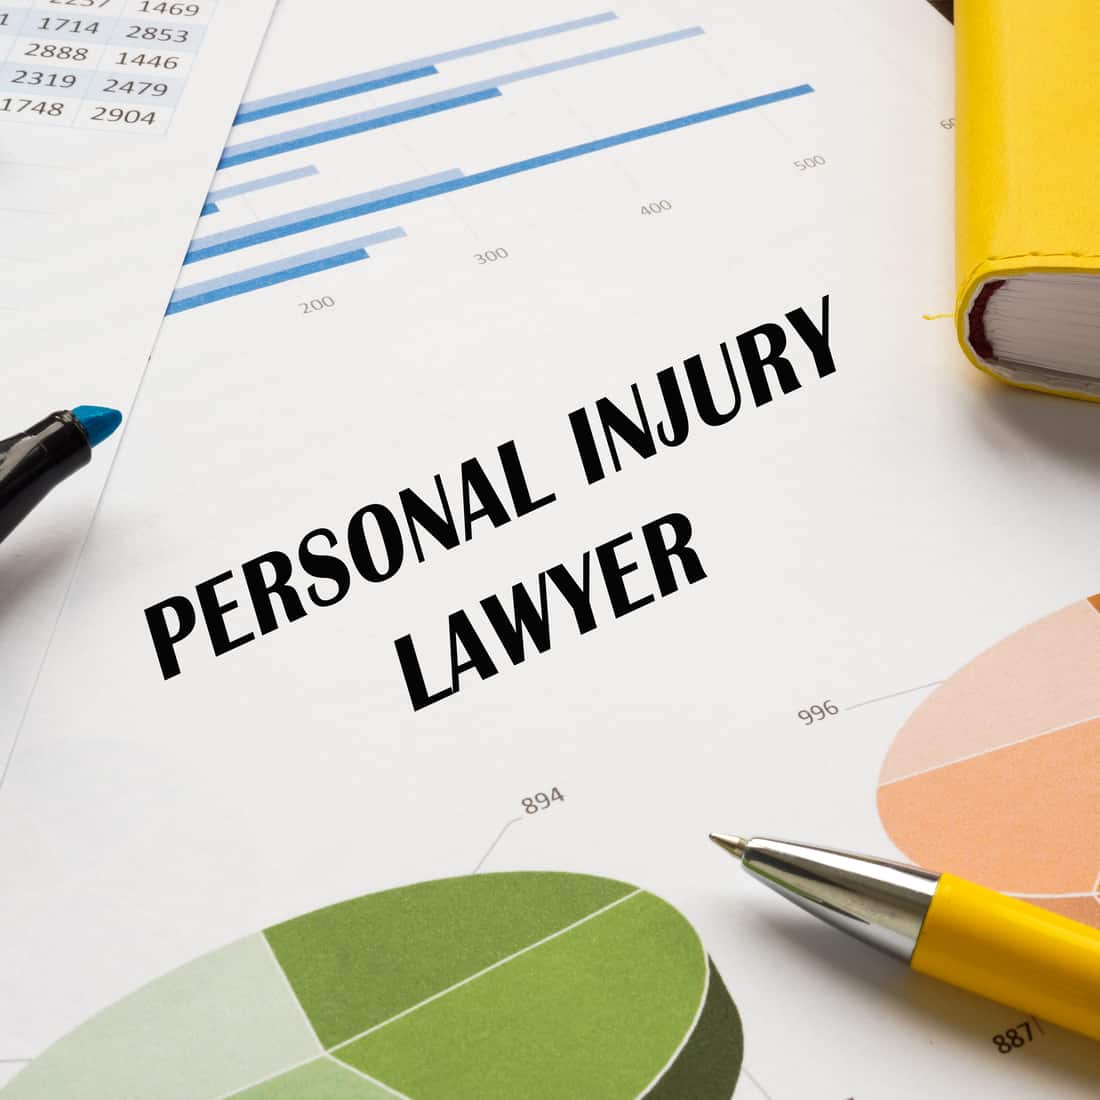 Personal Injury Lawyer at Sparrows Point, MD